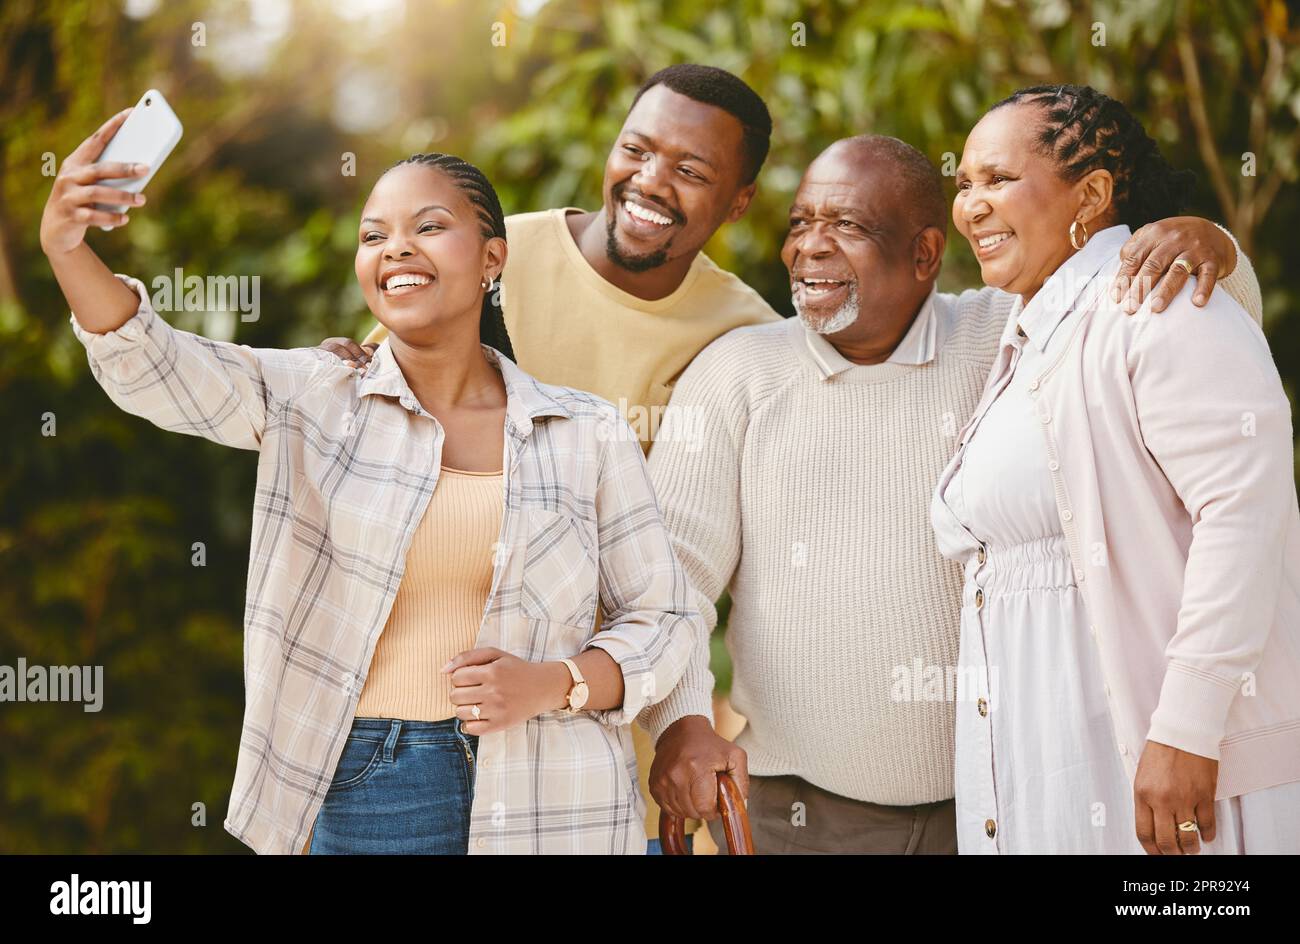 Selfie with my in-laws. a woman taking a selfie with her partner and his parents. Stock Photo